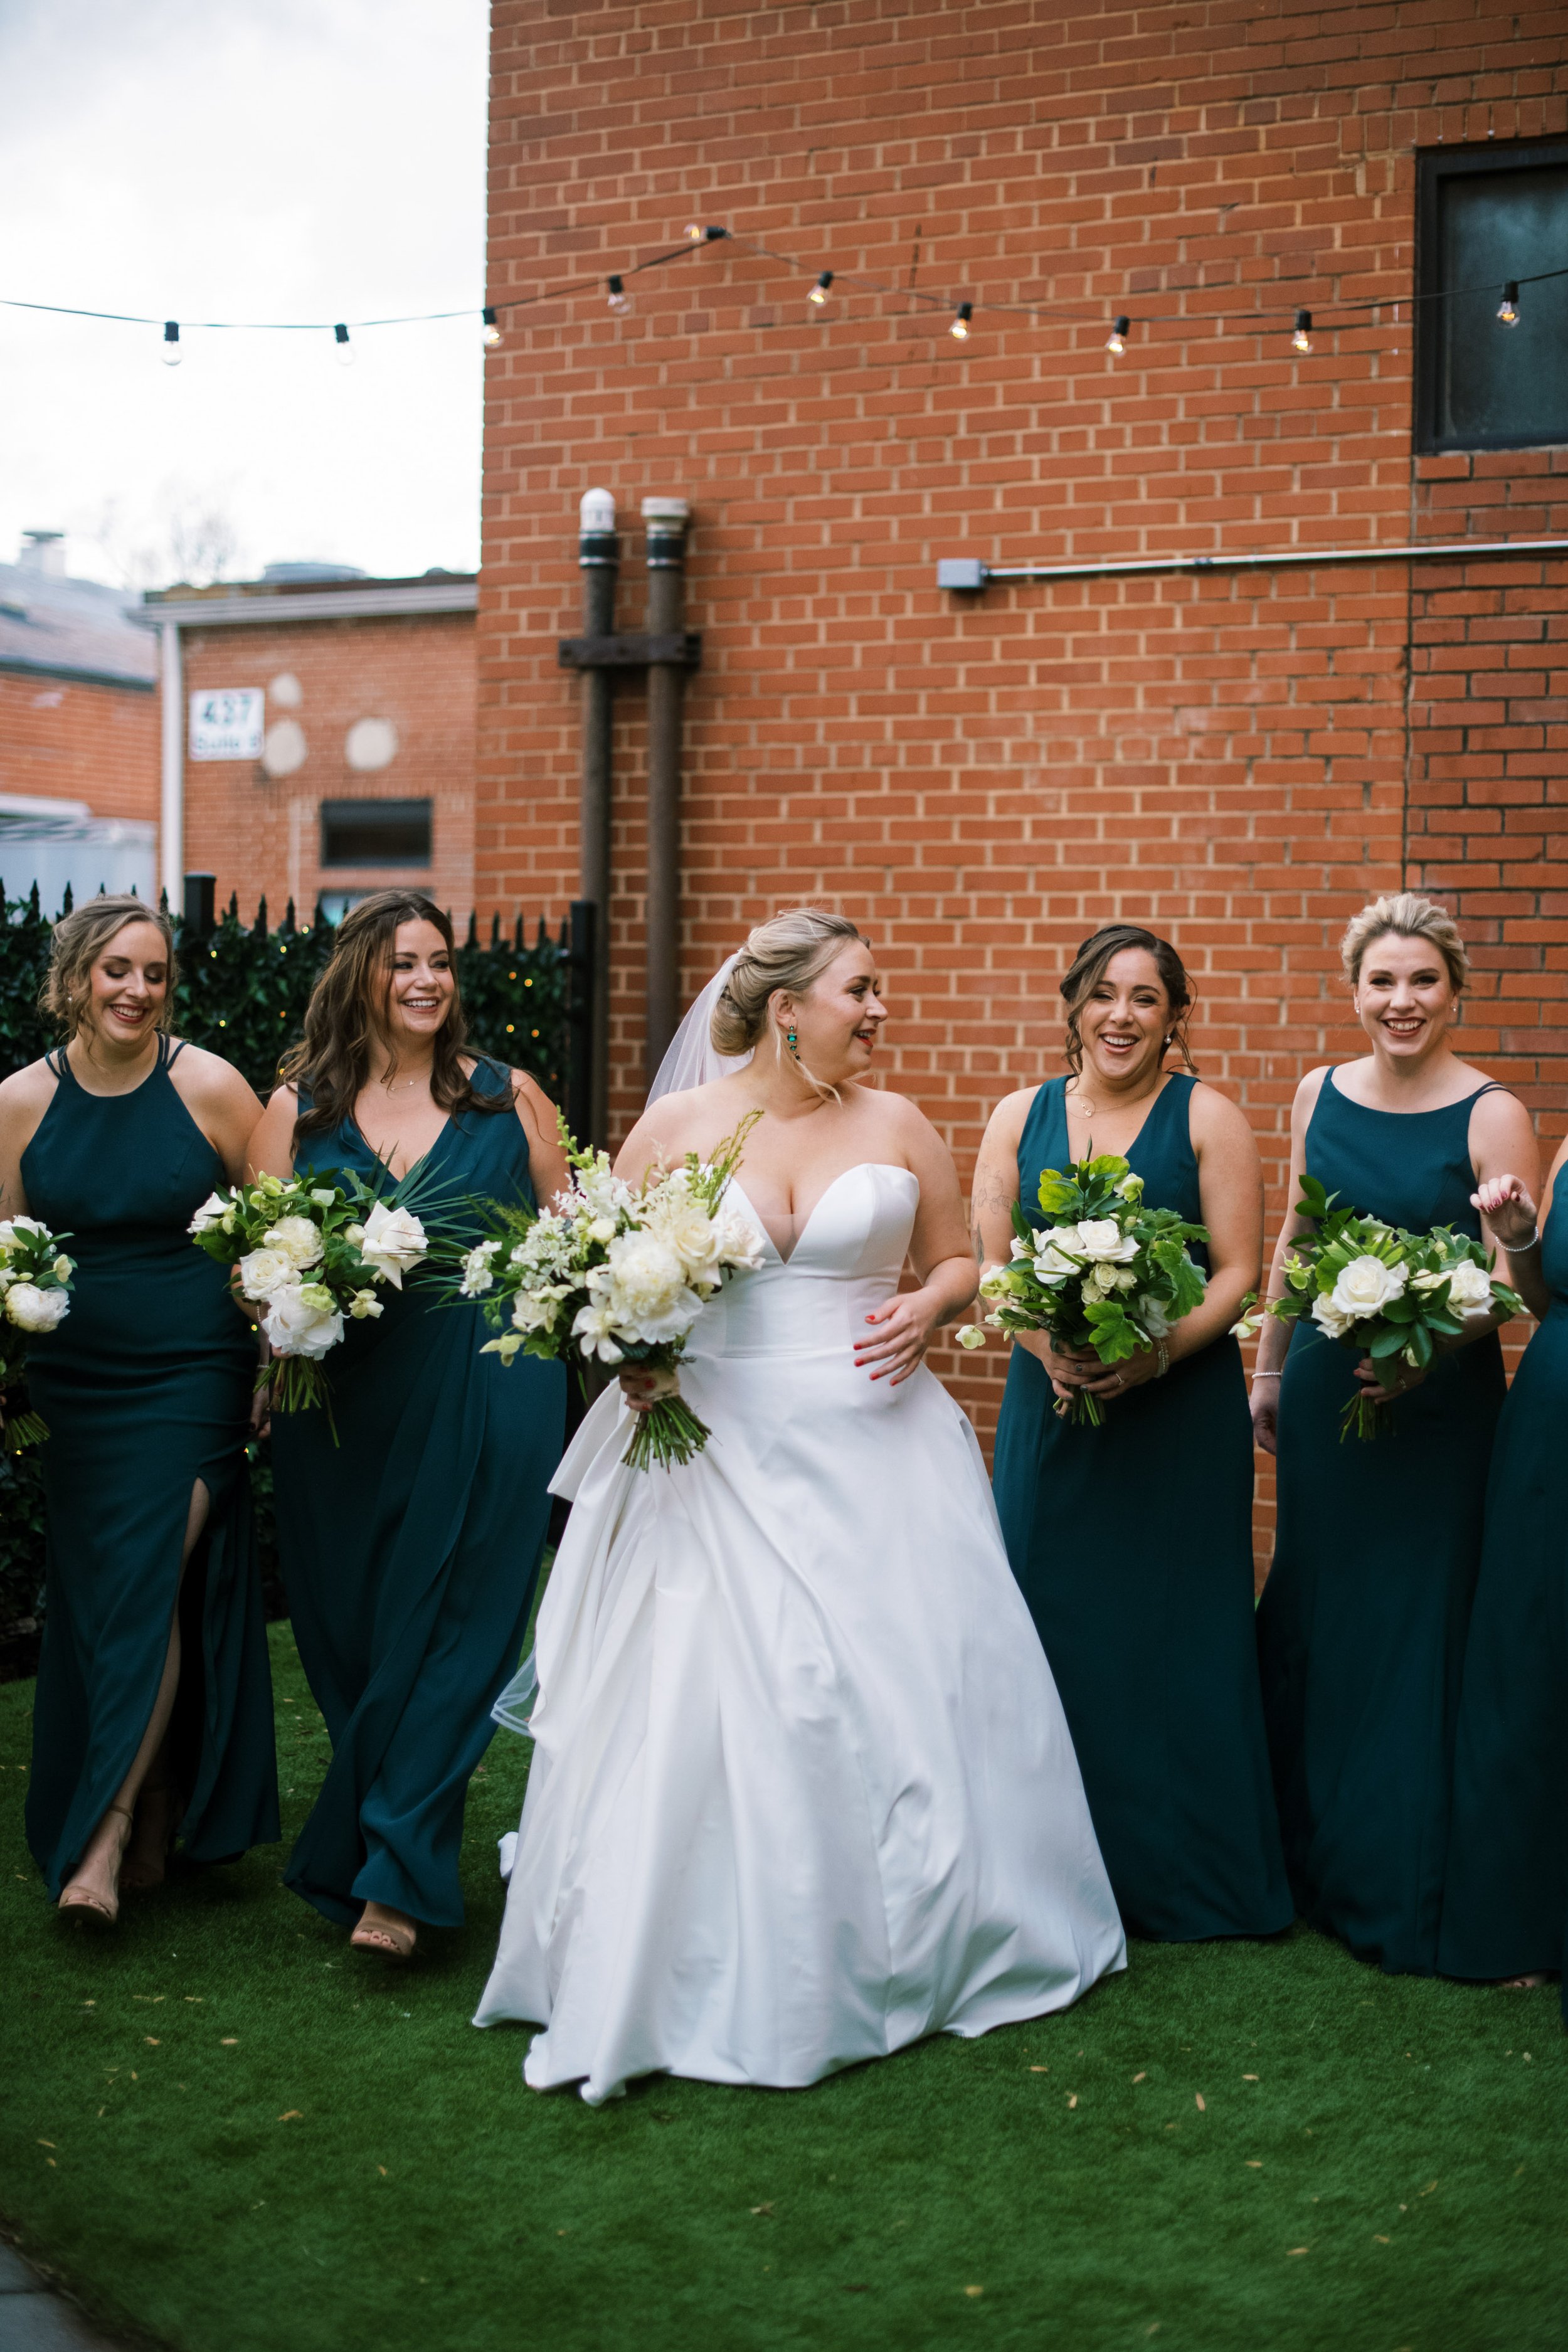 Winter Bride and Bridesmaids Wedding at The Cloth Mill at Eno River&nbsp;Fancy This Photography